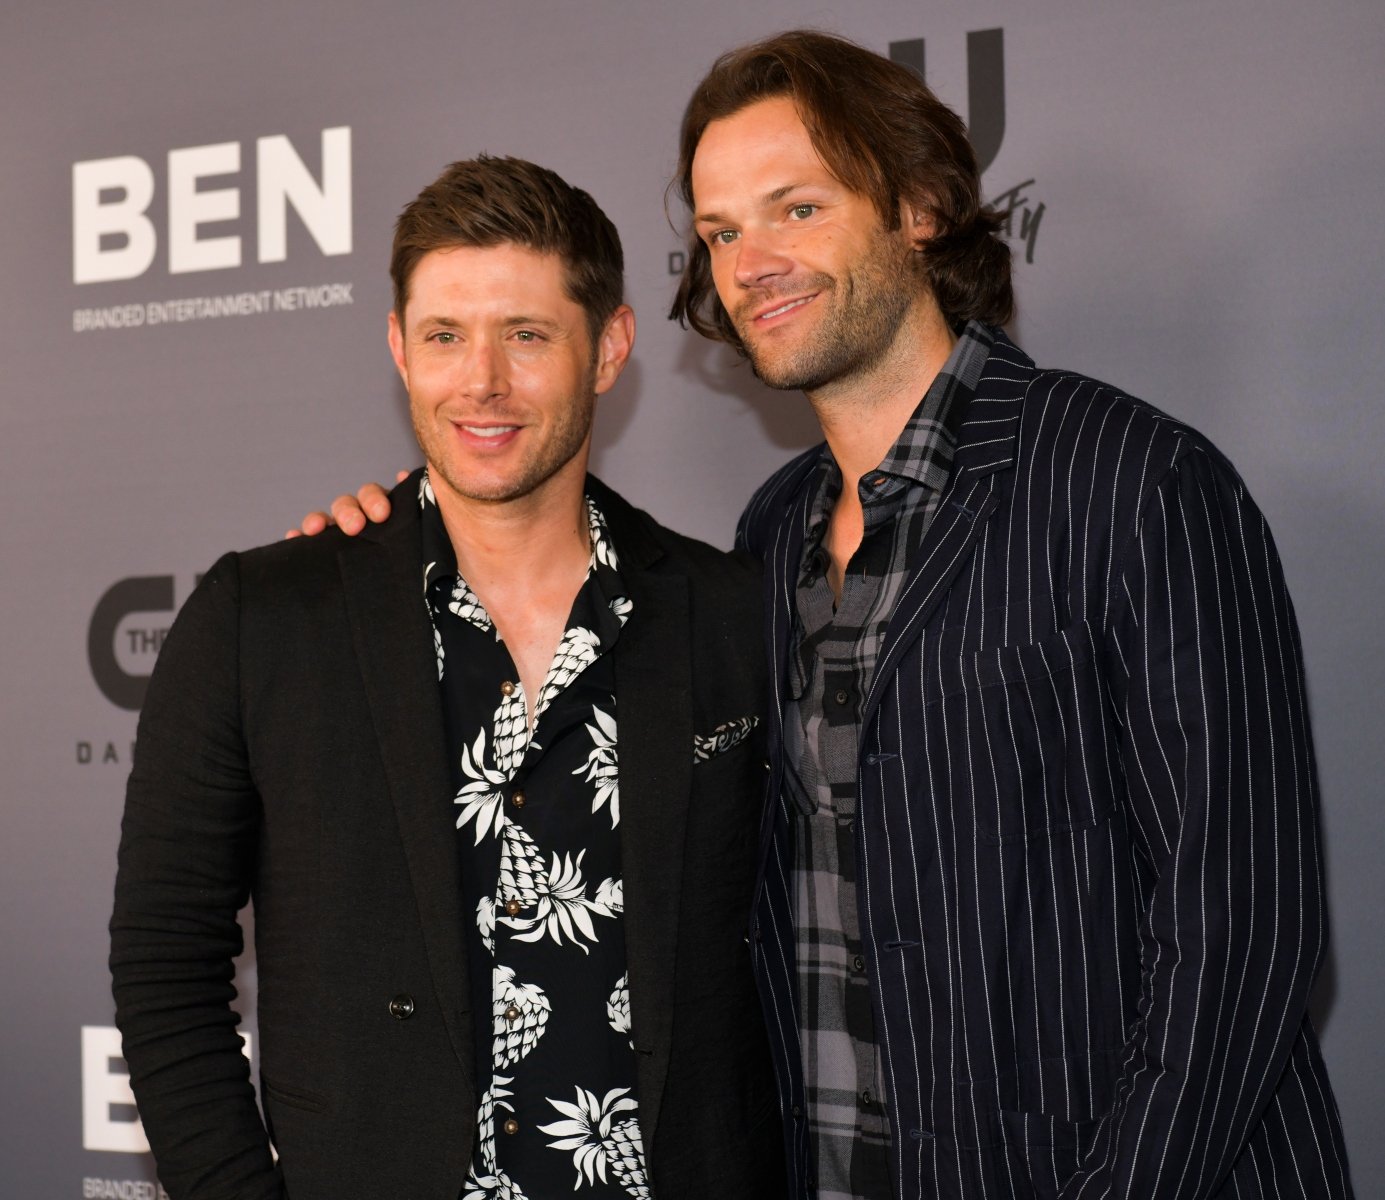 Jensen Ackles and Jared Padalecki of 'Supernatural' attend CW's Summer 2019 TCA Party